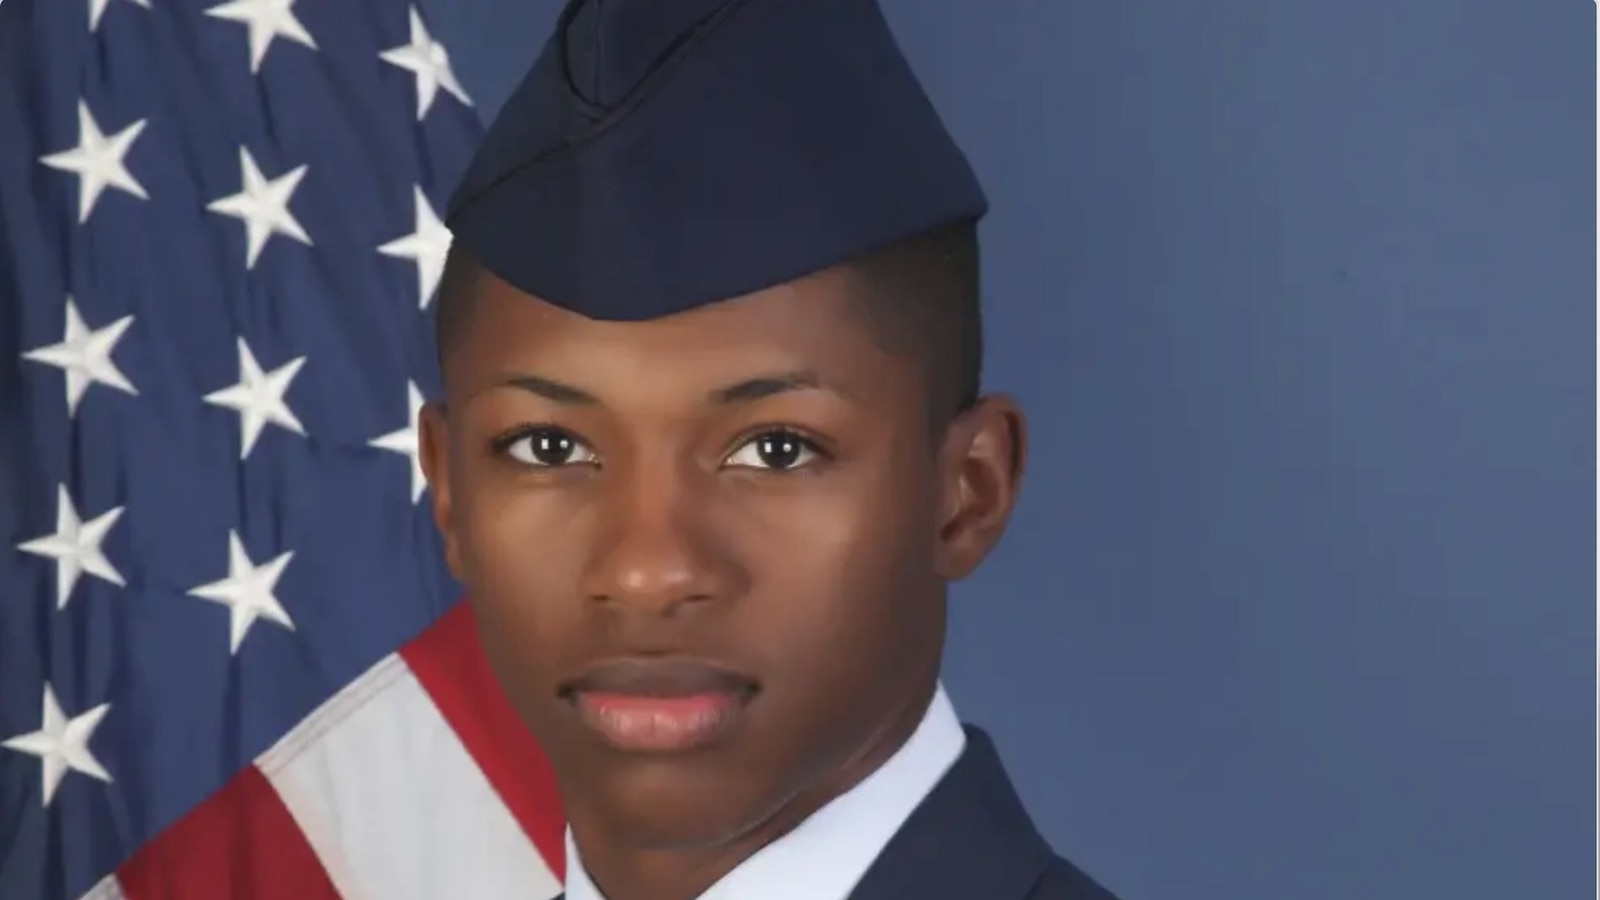 US Airman Roger Fortson, killed by deputy in his own home, honored at funeral [Video]